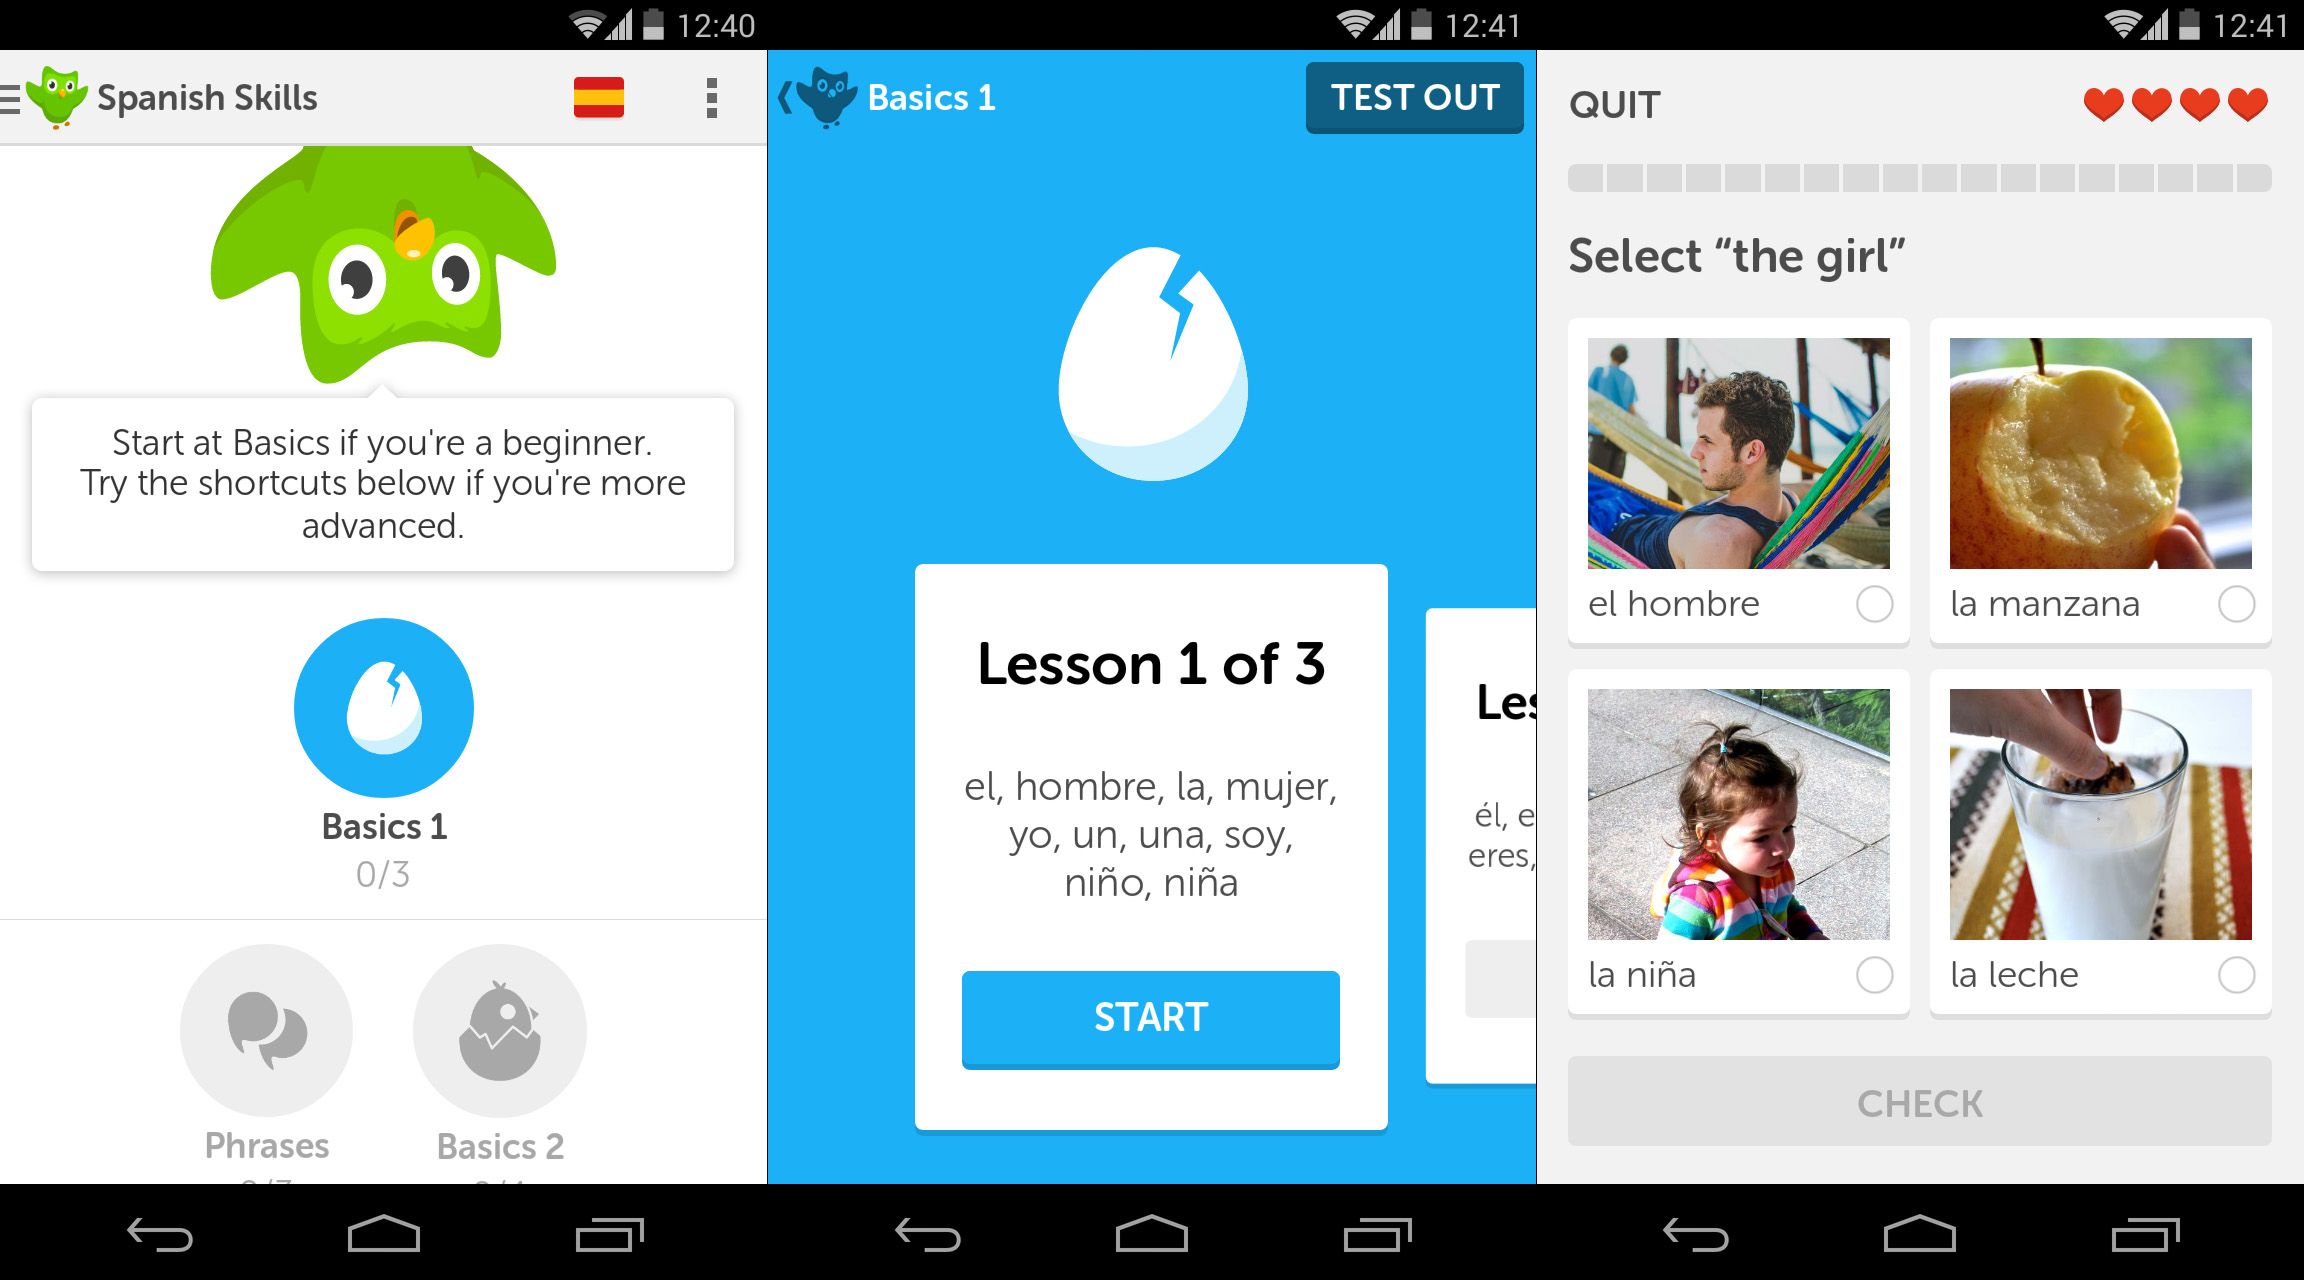 Learn languages while you help translate texts with ...